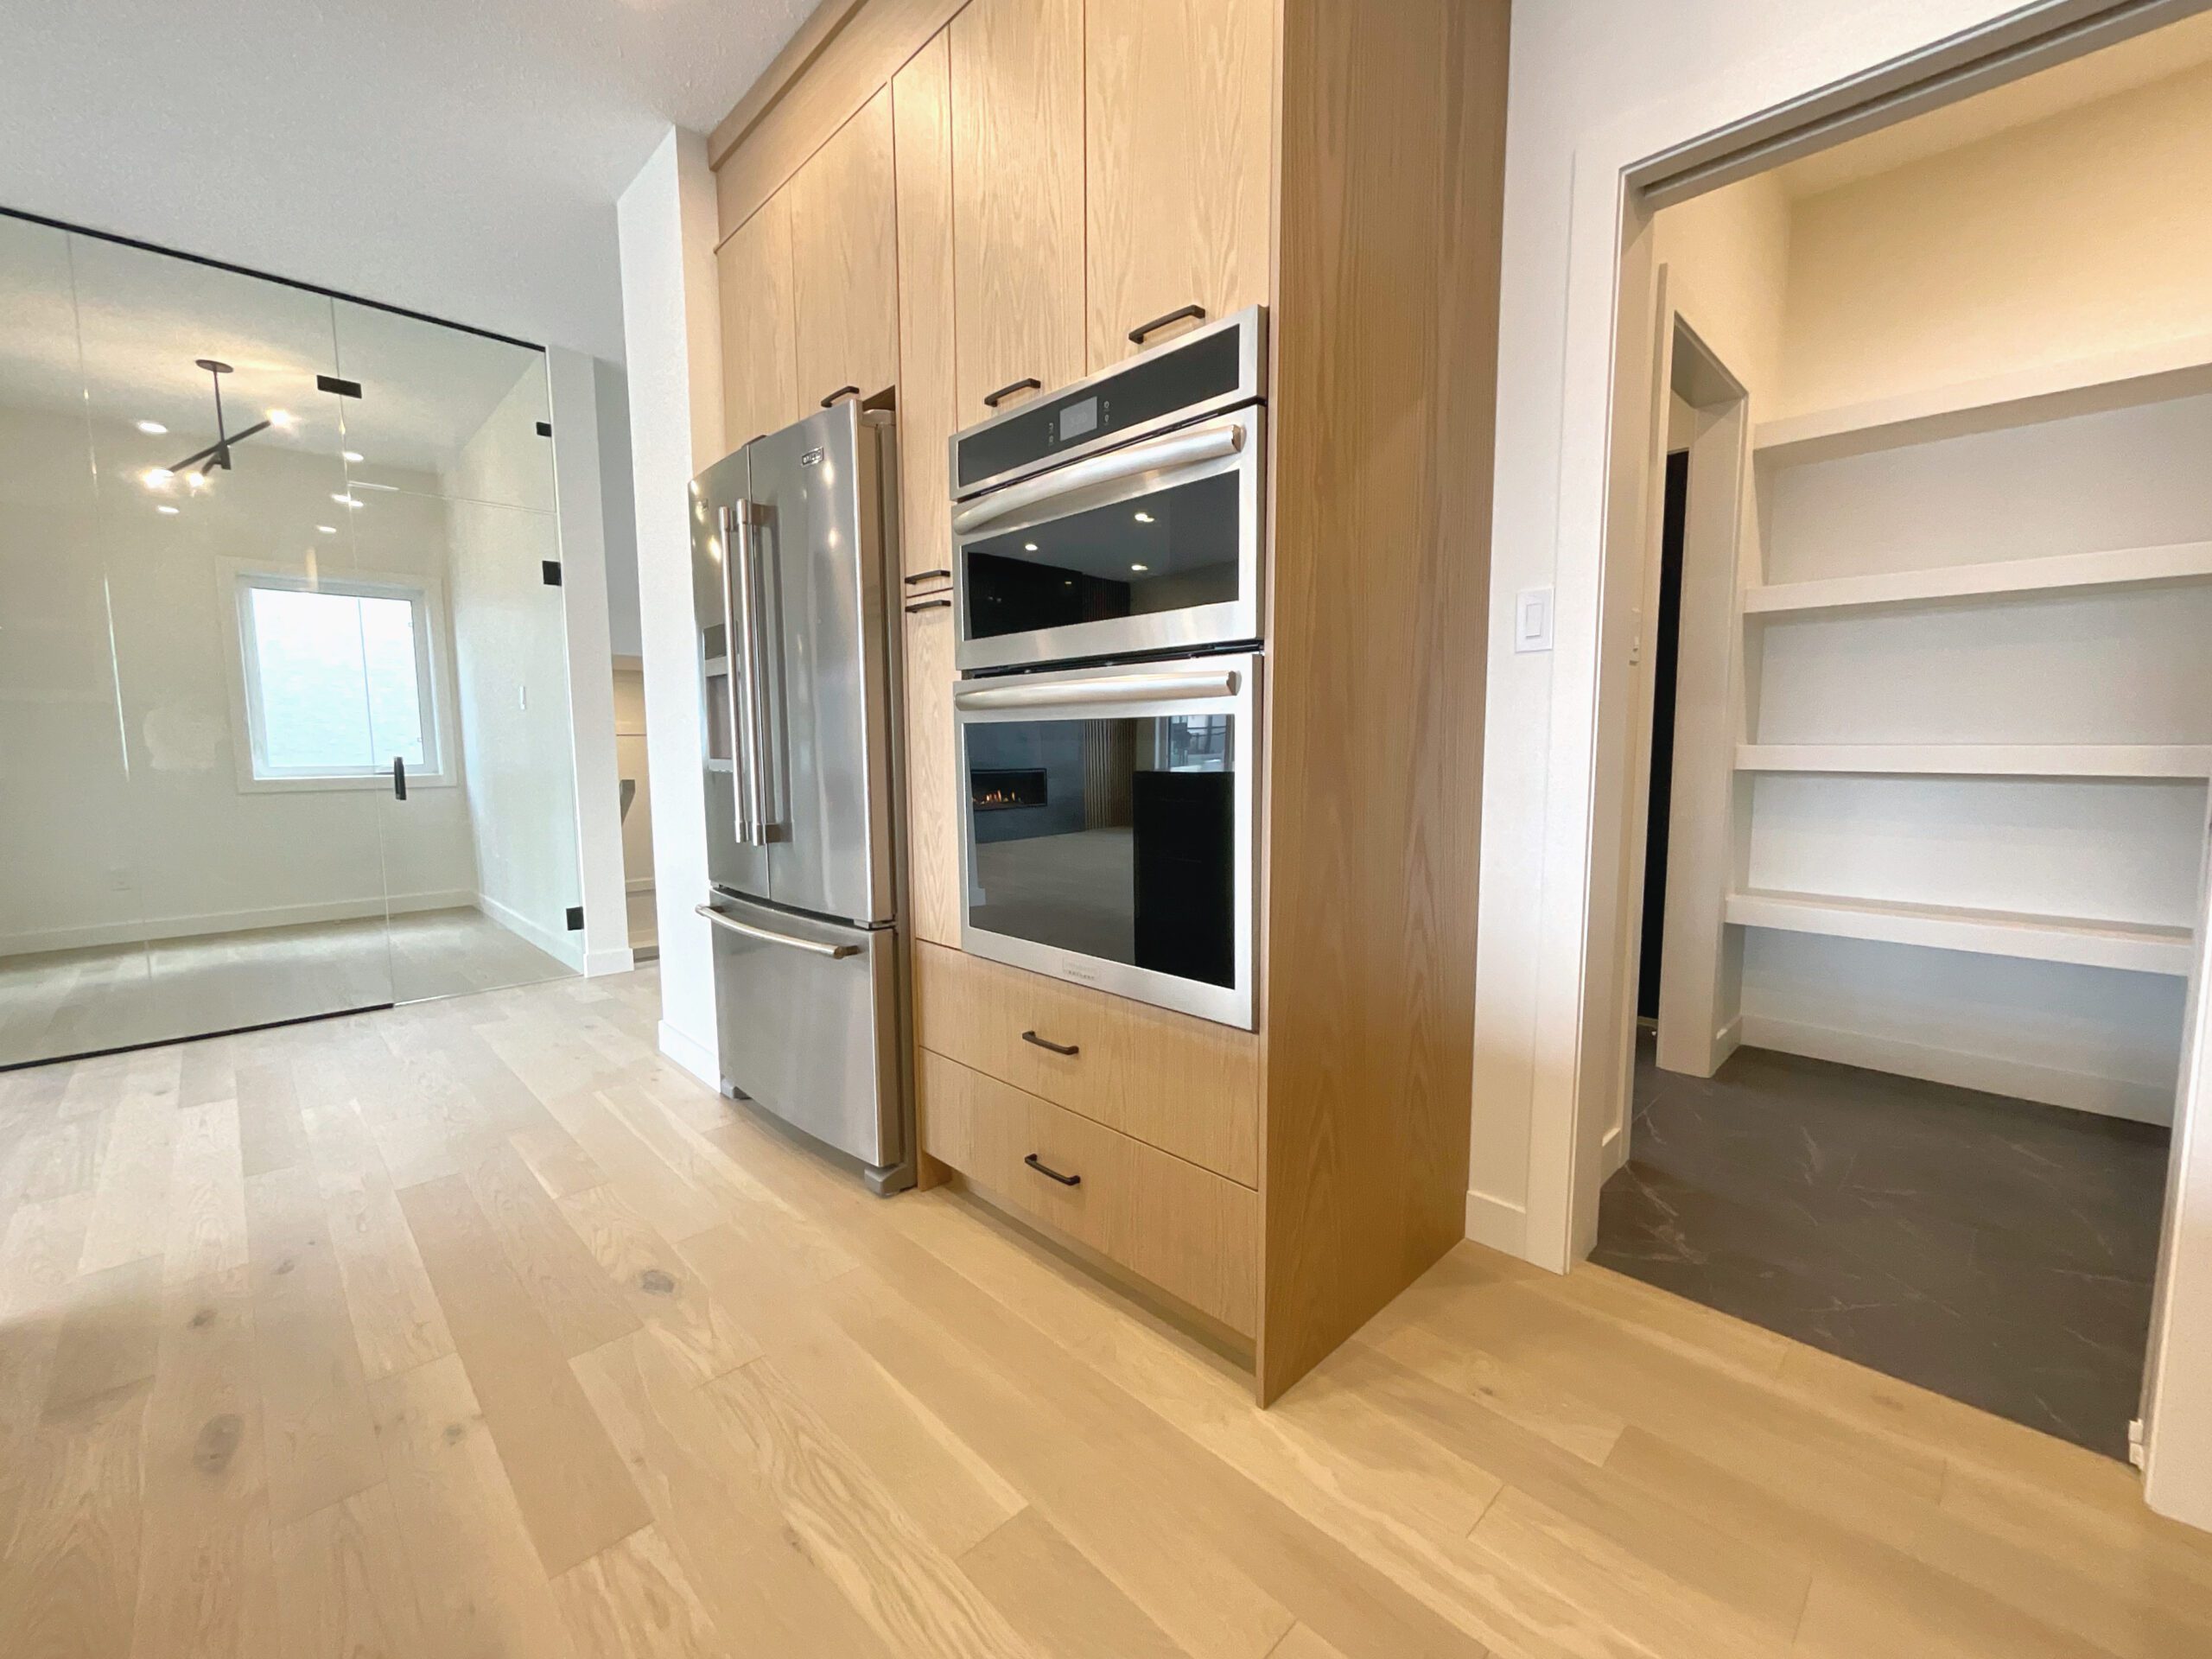 A kitchen with a built-in stove and a refrigerator.